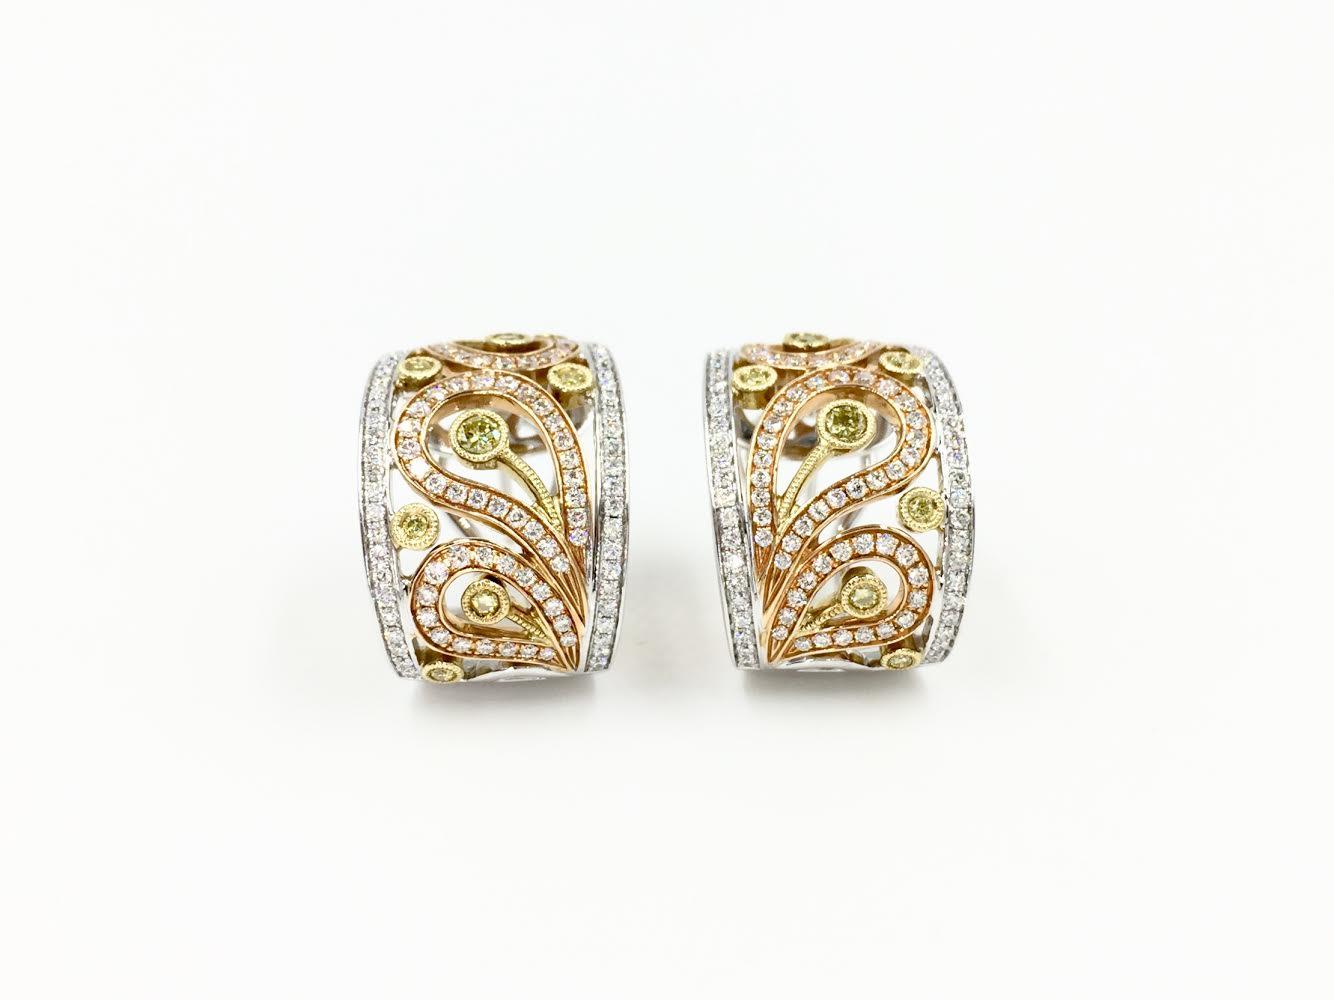 Authentic Simon G. 18 karat yellow, rose and white gold earrings from the beautiful Paisley Collection with a total diamond weight of 1.24 carats. These wearable and chic earrings have .99 carats of round brilliant white diamonds and .25 carats of